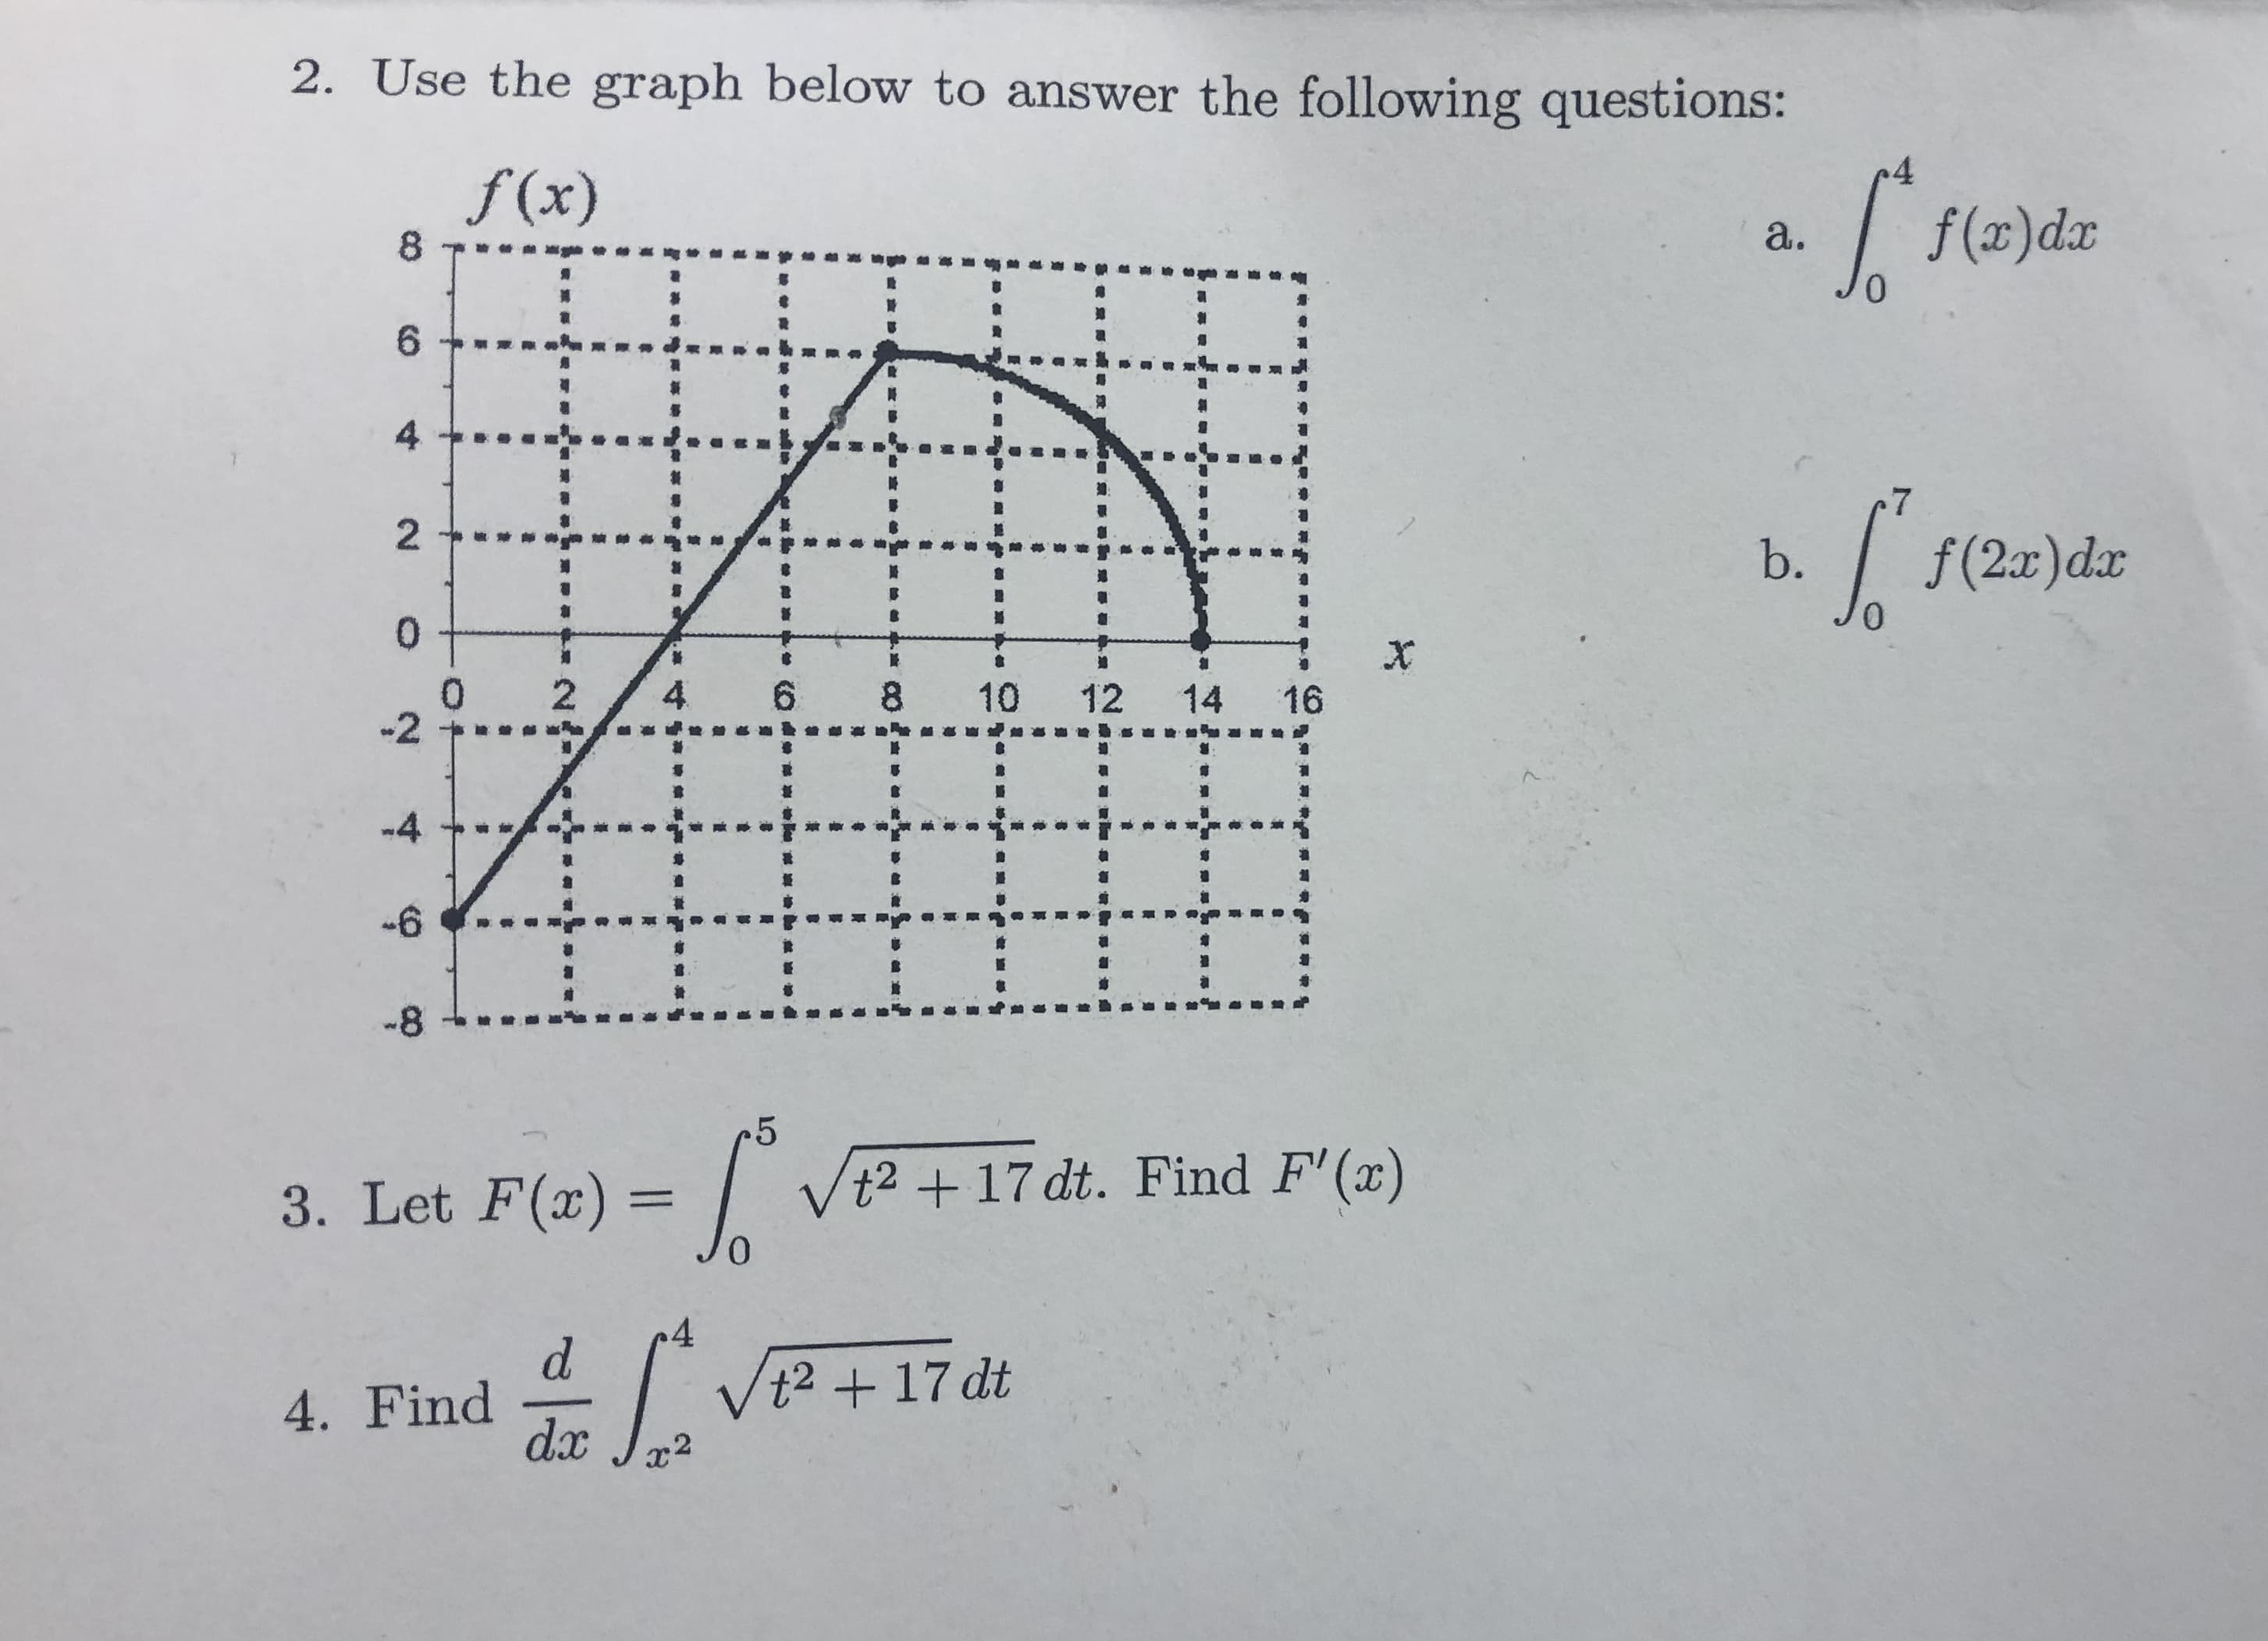 2. Use the graph below to answer the following questions:
p4
f(x)
f(x)dax
а.
8
6
4
7
.f(2r)dr
2
b.
4
2
6 8 10 12 14 16
-2
-4
-6
-8
5
Vt2 +17 dt. Find F'(x)
3. Let F(x) =
0
4
Vt +17 dt
4. Find
dx
c2
O'
